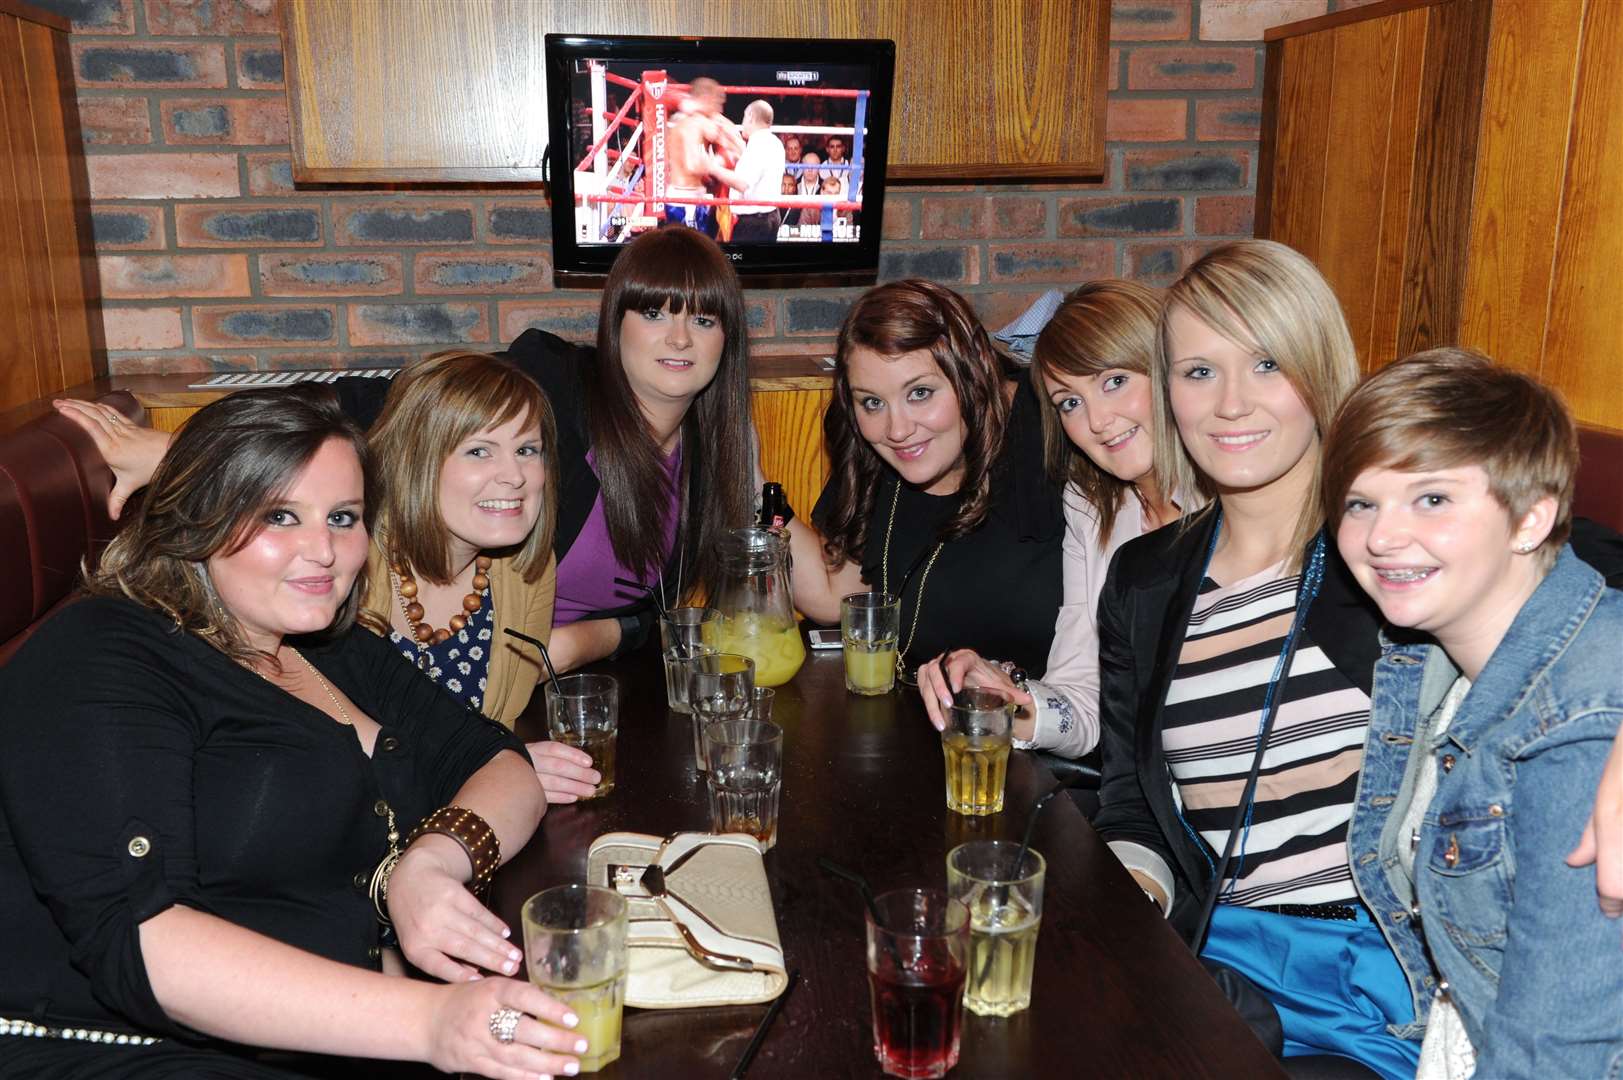 Dionne Jack (third left) from Avoch parties for her 24th birthday at Auctioneers with friends and family.